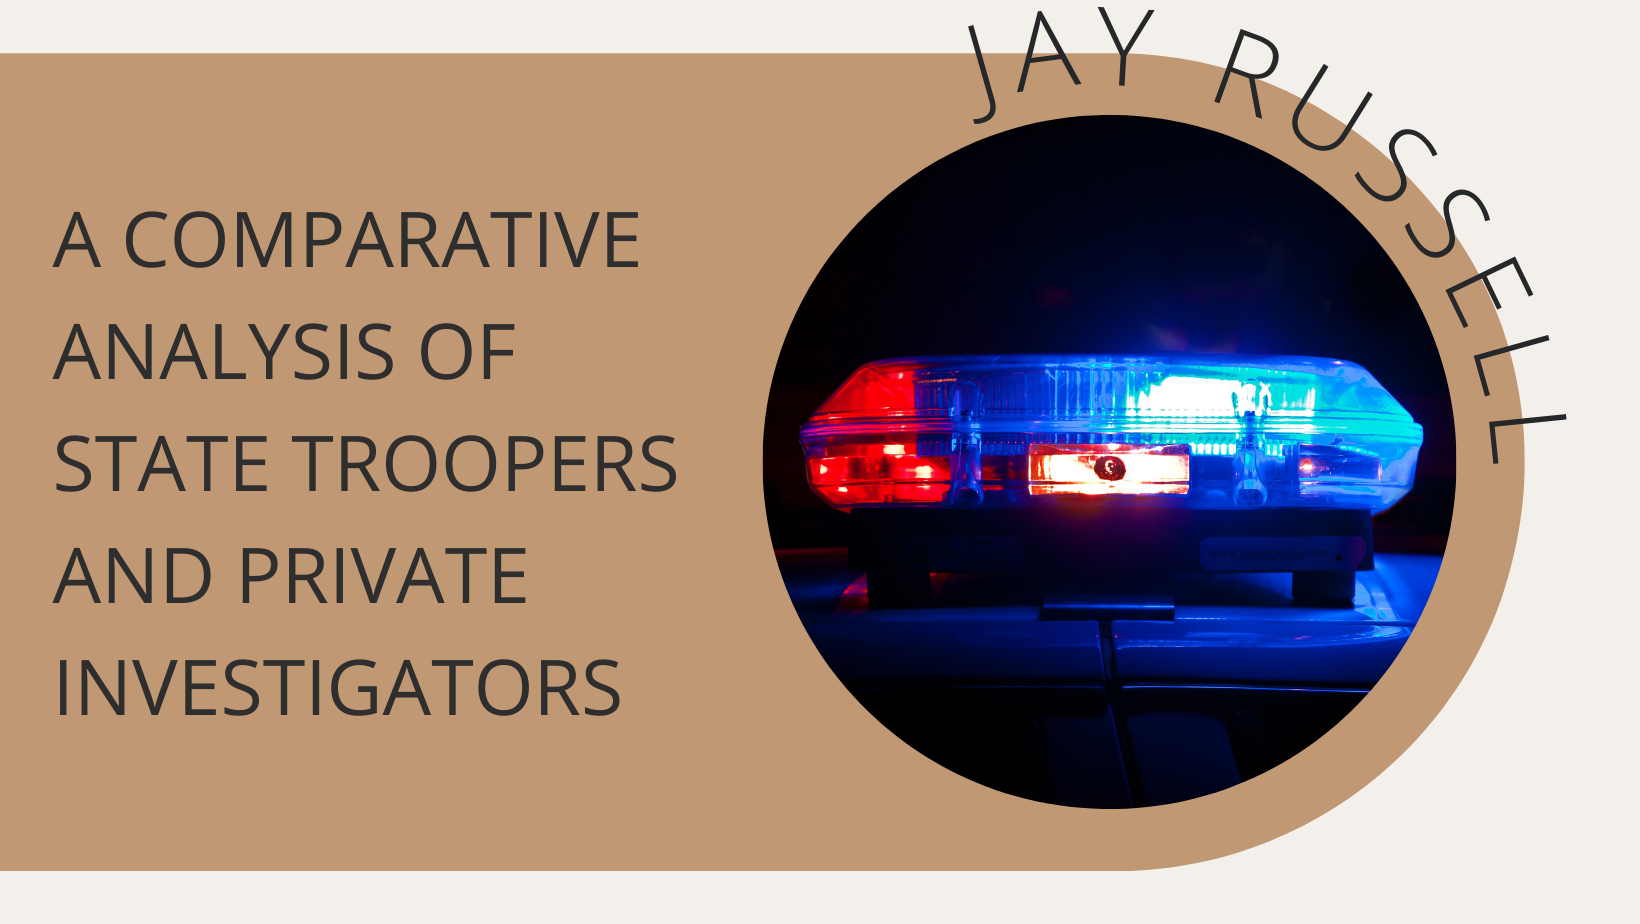 A Comparative Analysis of State Troopers and Private Investigators